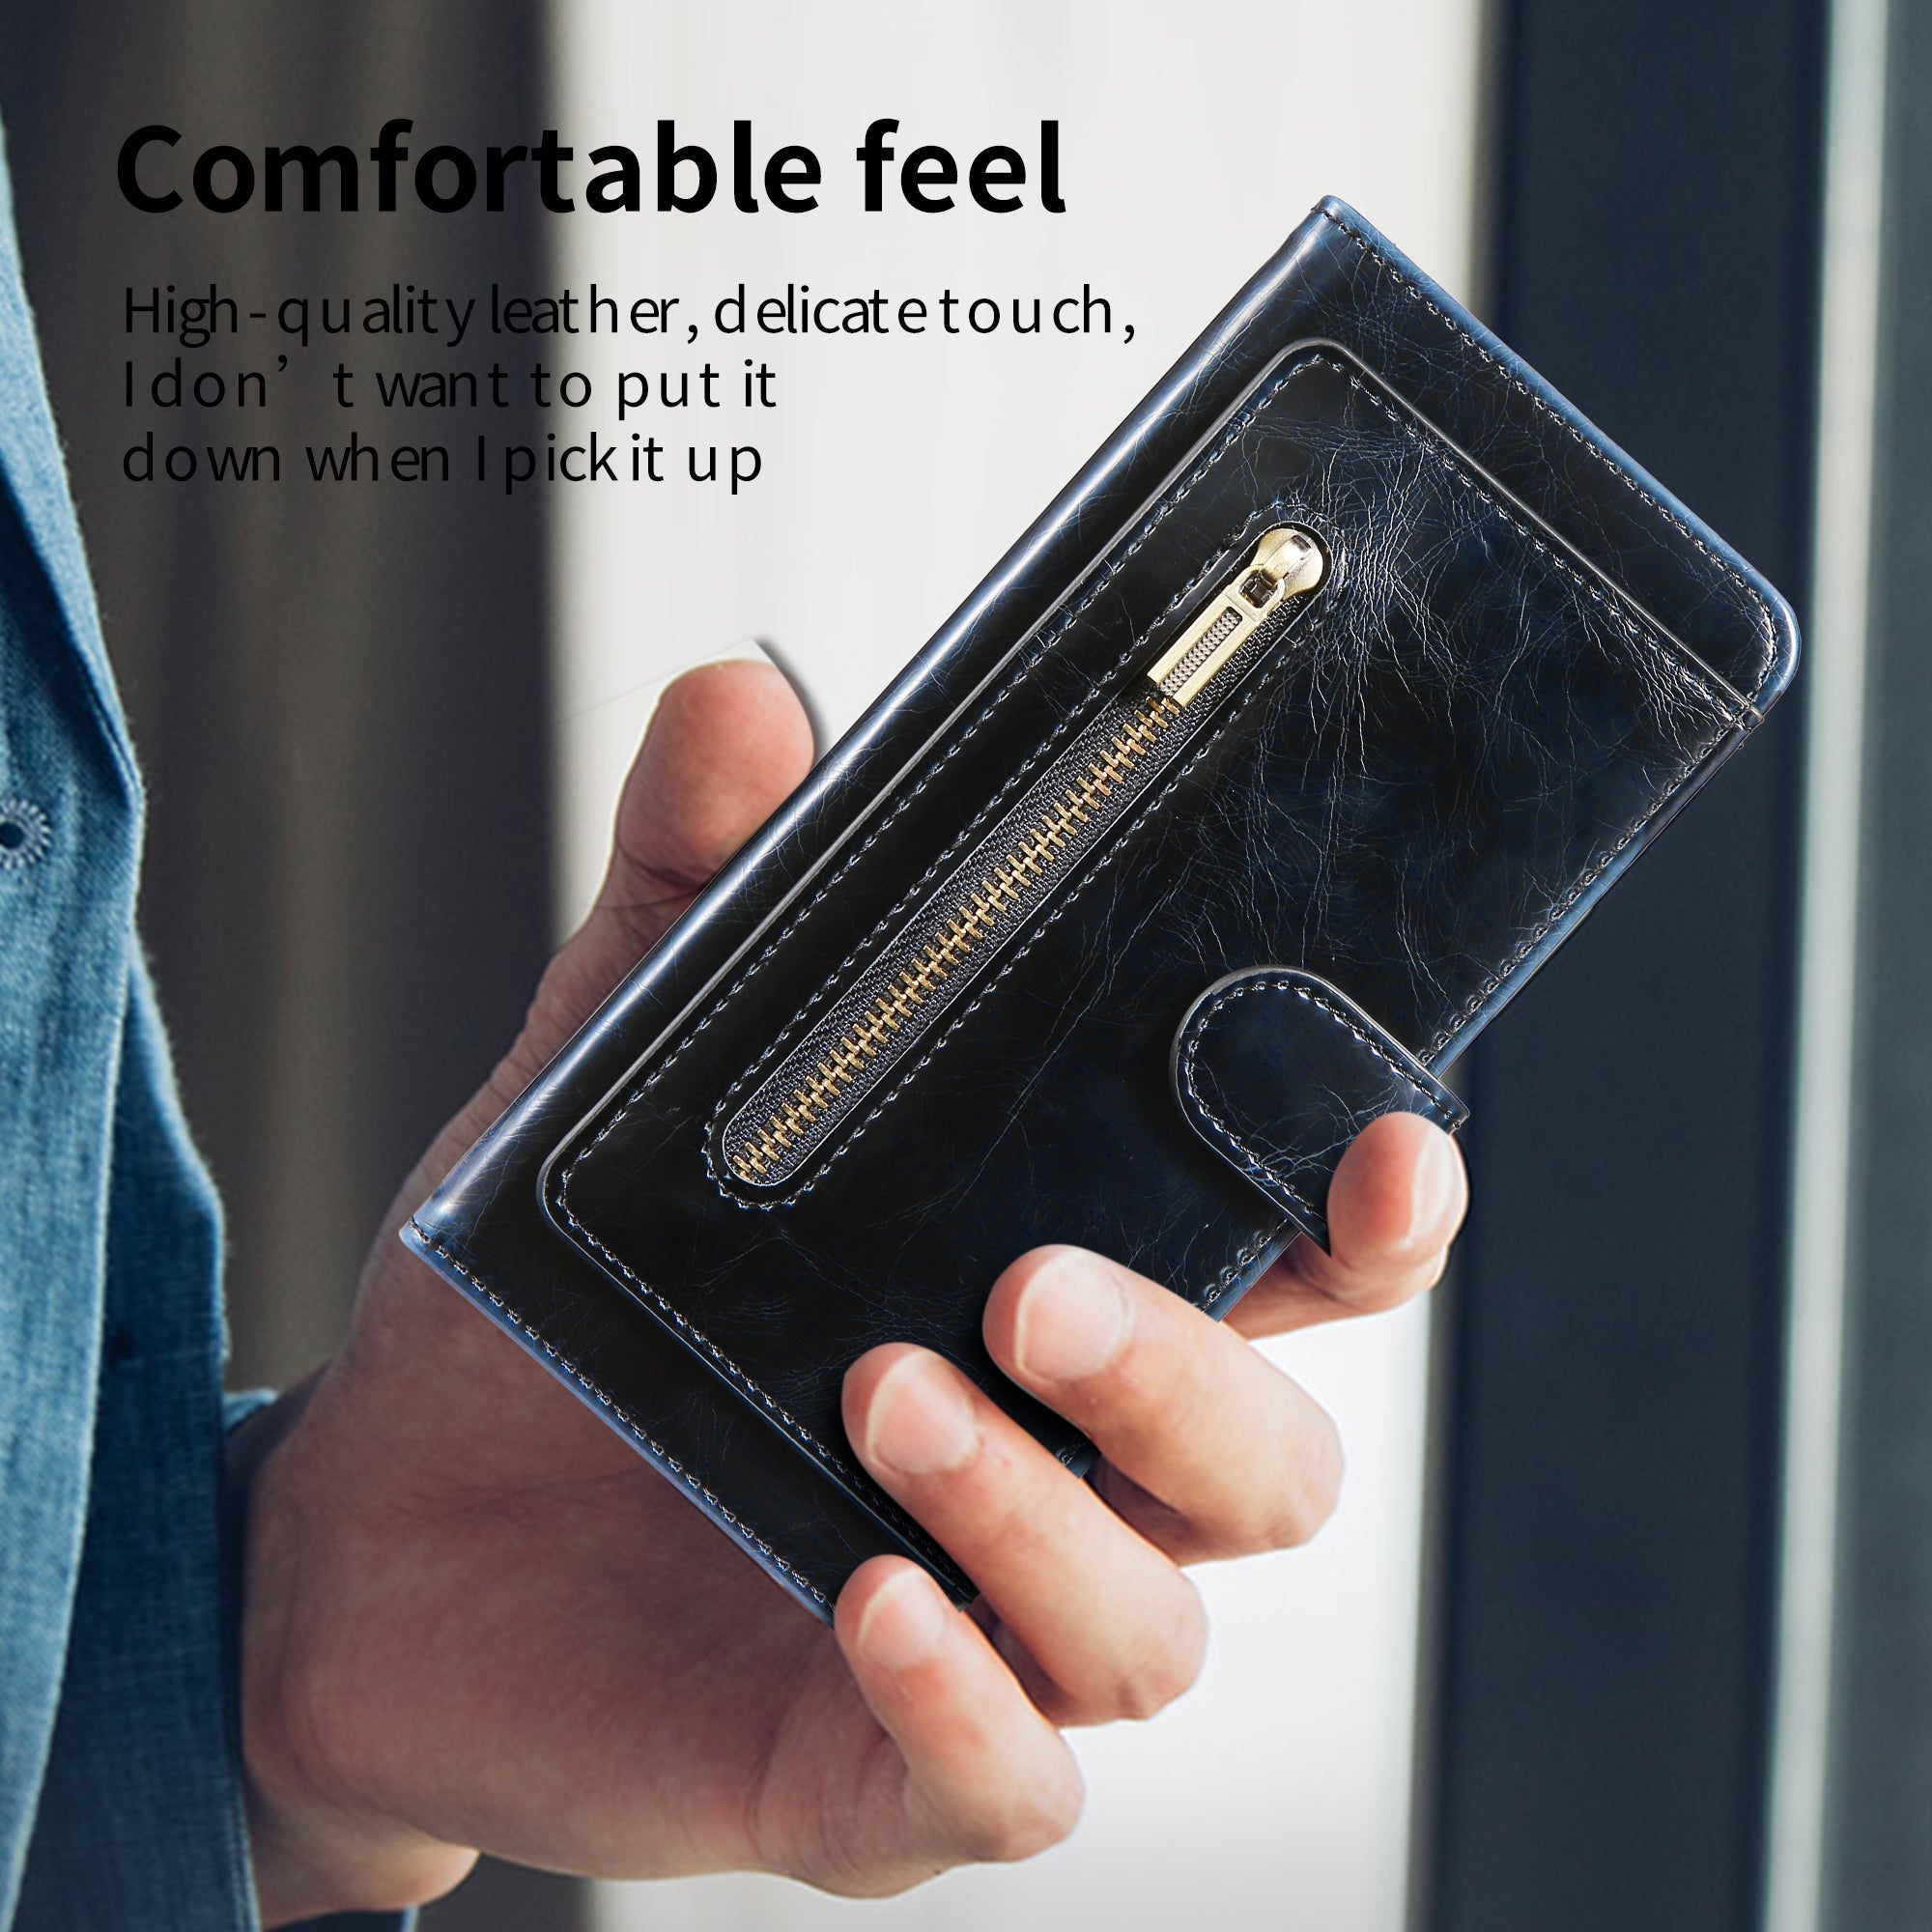 2022 new foldable mobile phone leather z fold3 case covertd5of